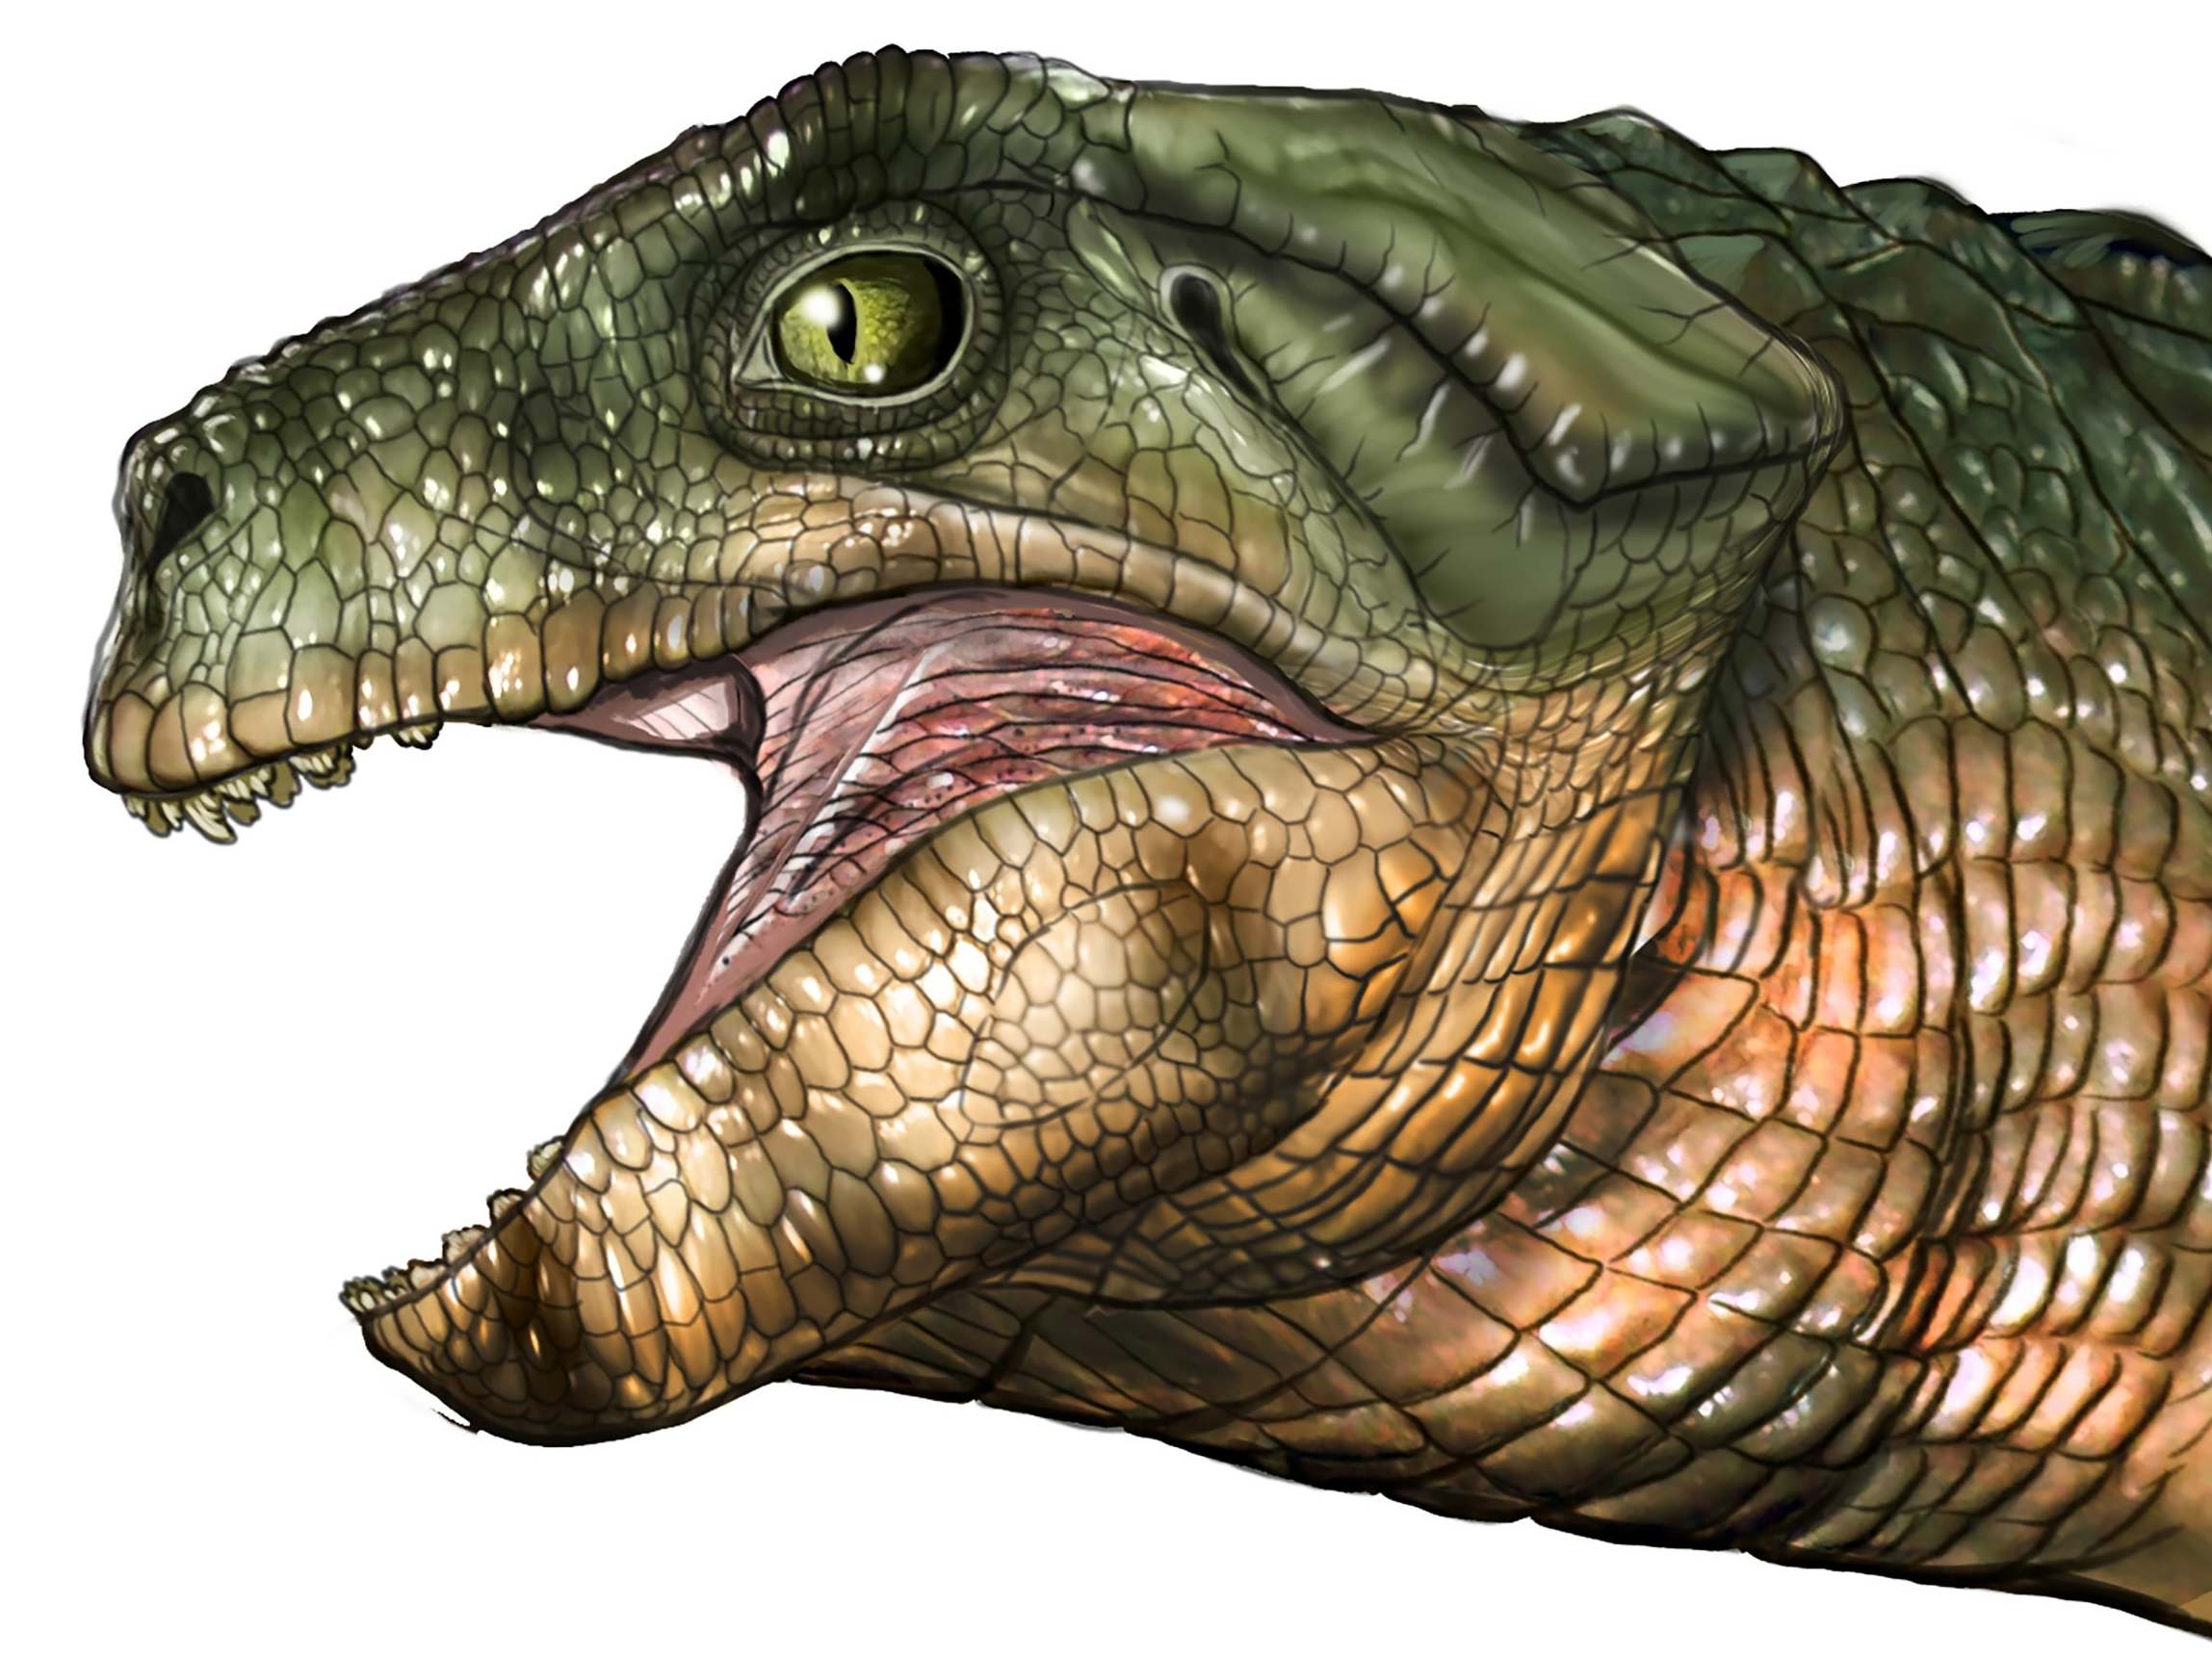 Ancestors of modern crocs evolved to survive on a plant diet at least three times